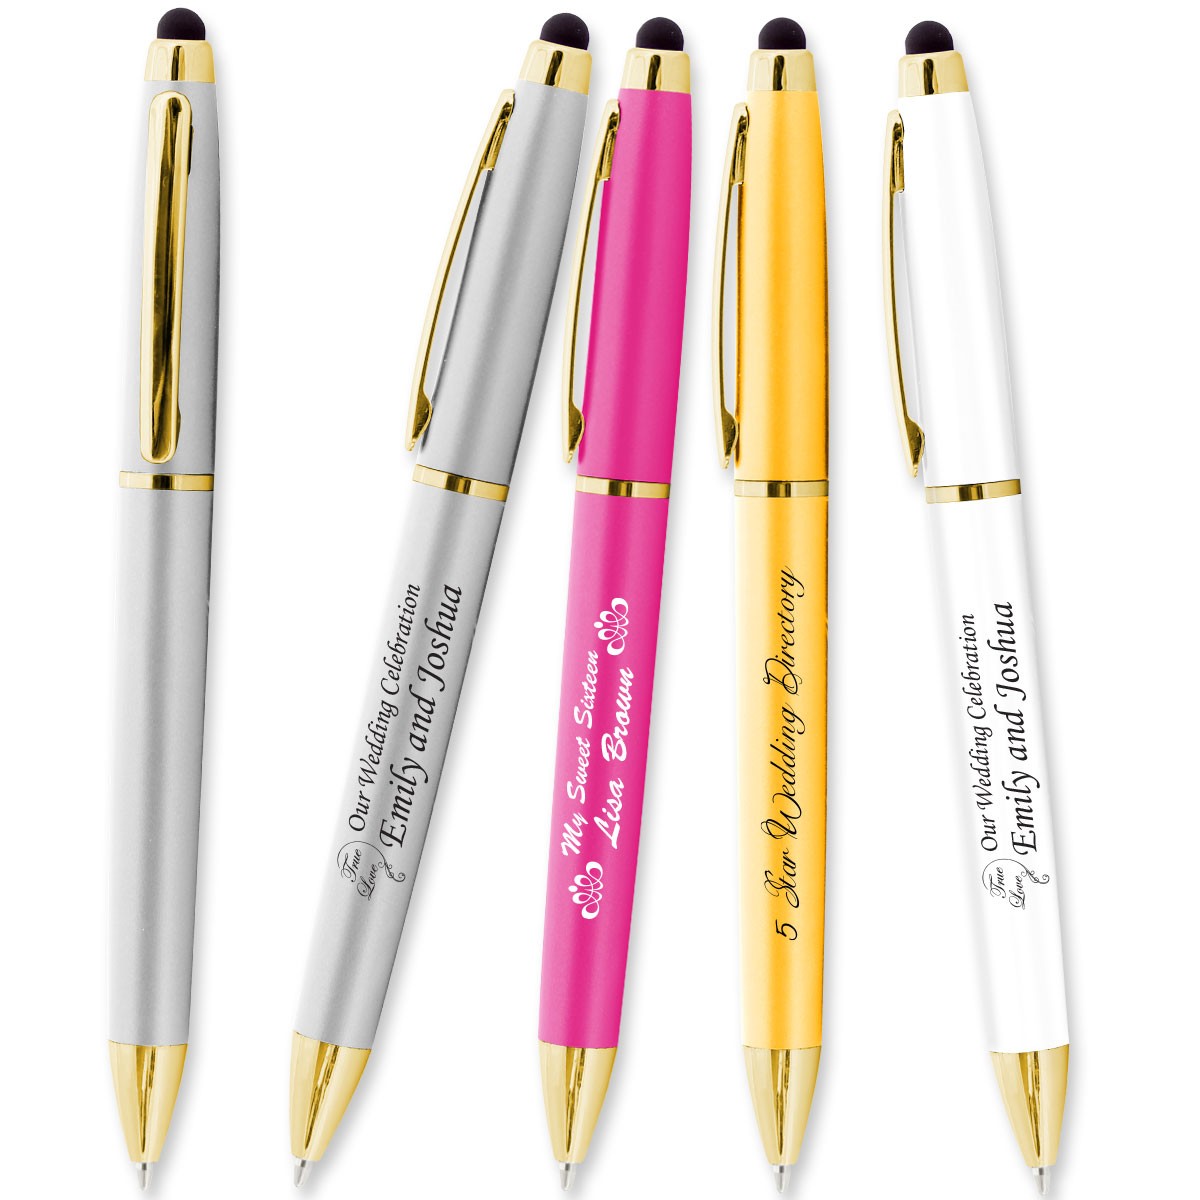 Gold Toned Wedding Pens Waucust3600 Promotional Products From